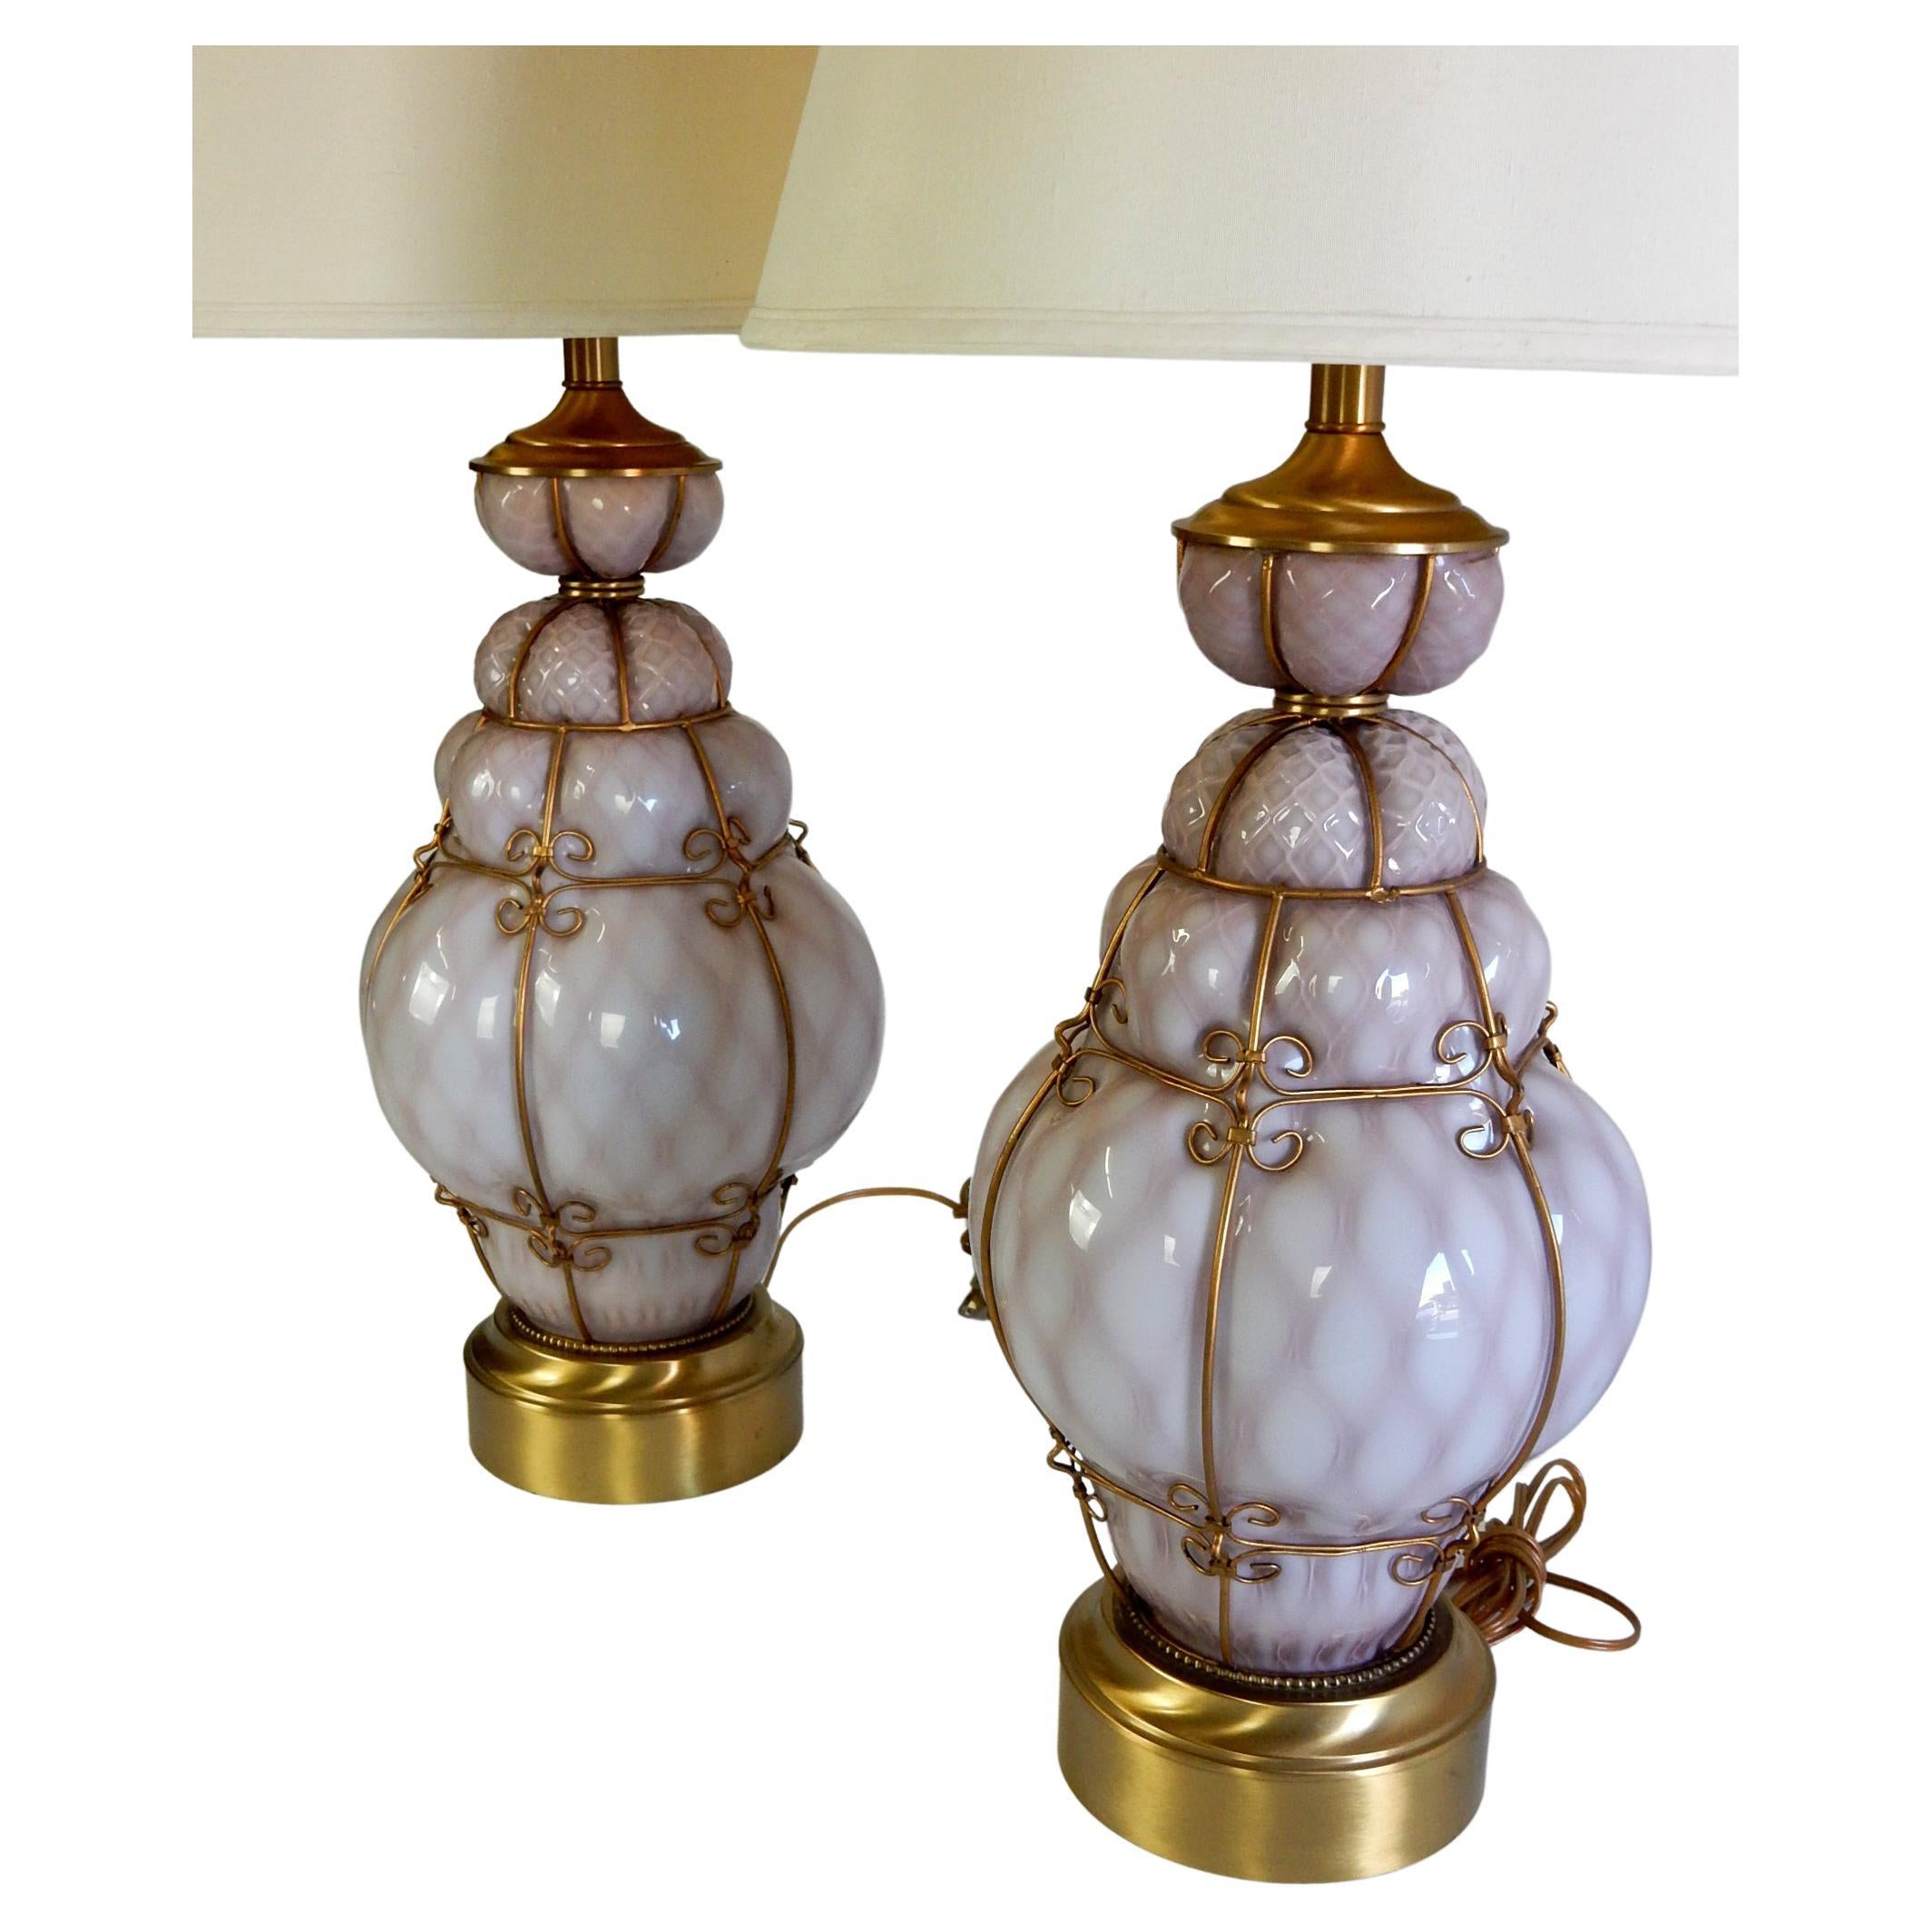 Large pair of gorgeous Italian hand blown cage art glass table lamp
attributed to Seguso Italy (not marked).
Violet colored glass with golden metal cage and hardware.
Both are flawless.